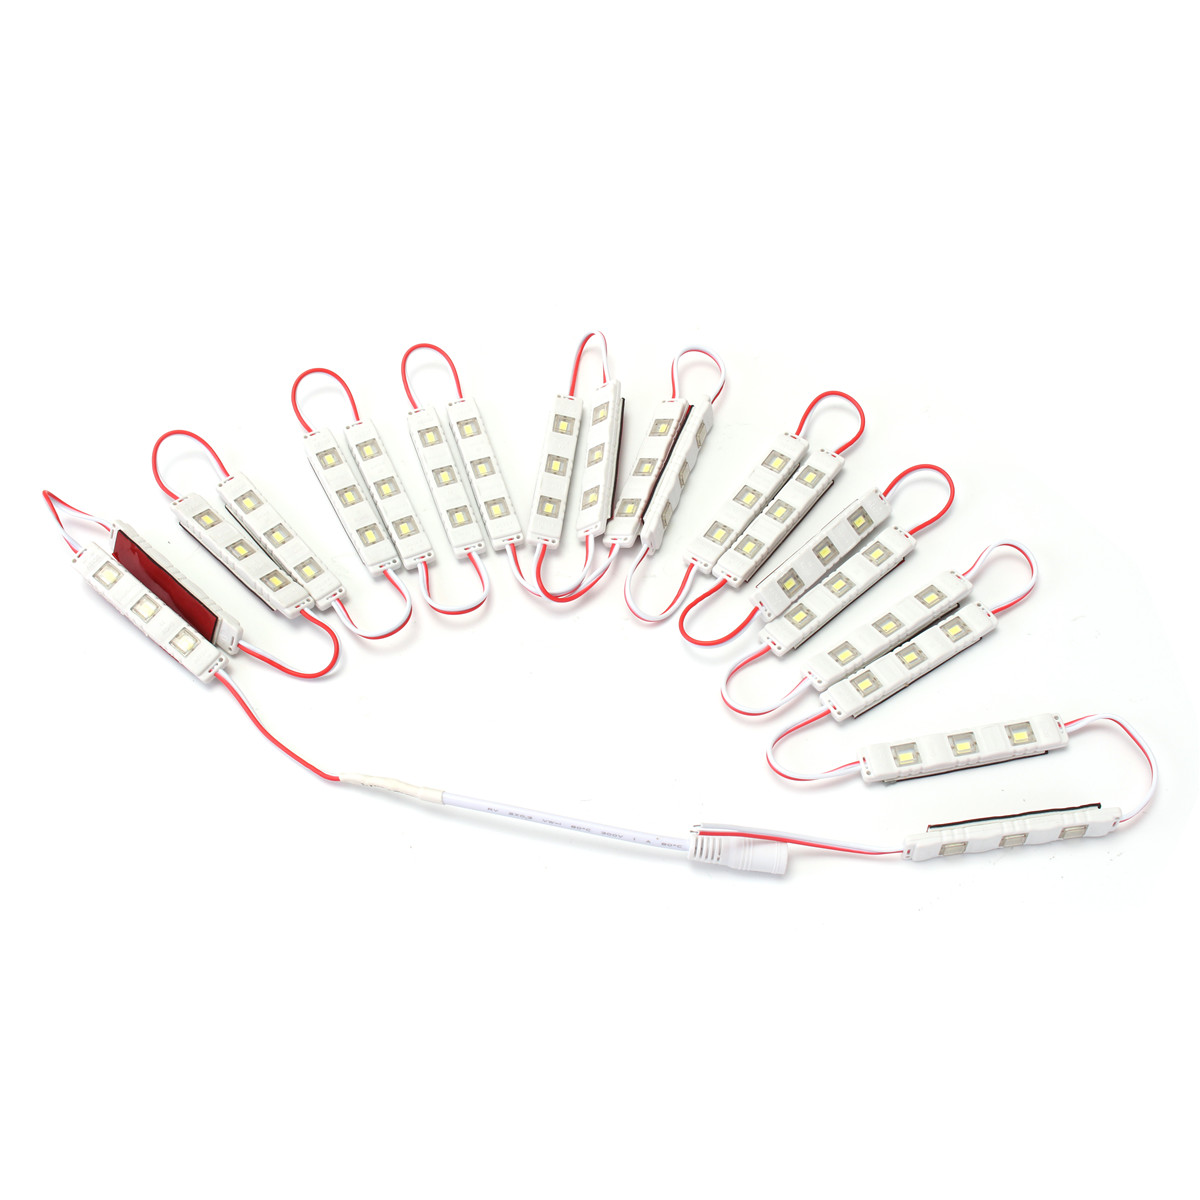 Dimmable-Waterproof-12W-SMD5630-60-LED-Module-Strip-Under-Cabinet-Mirror-Light-Kit-AC110-240V-1292566